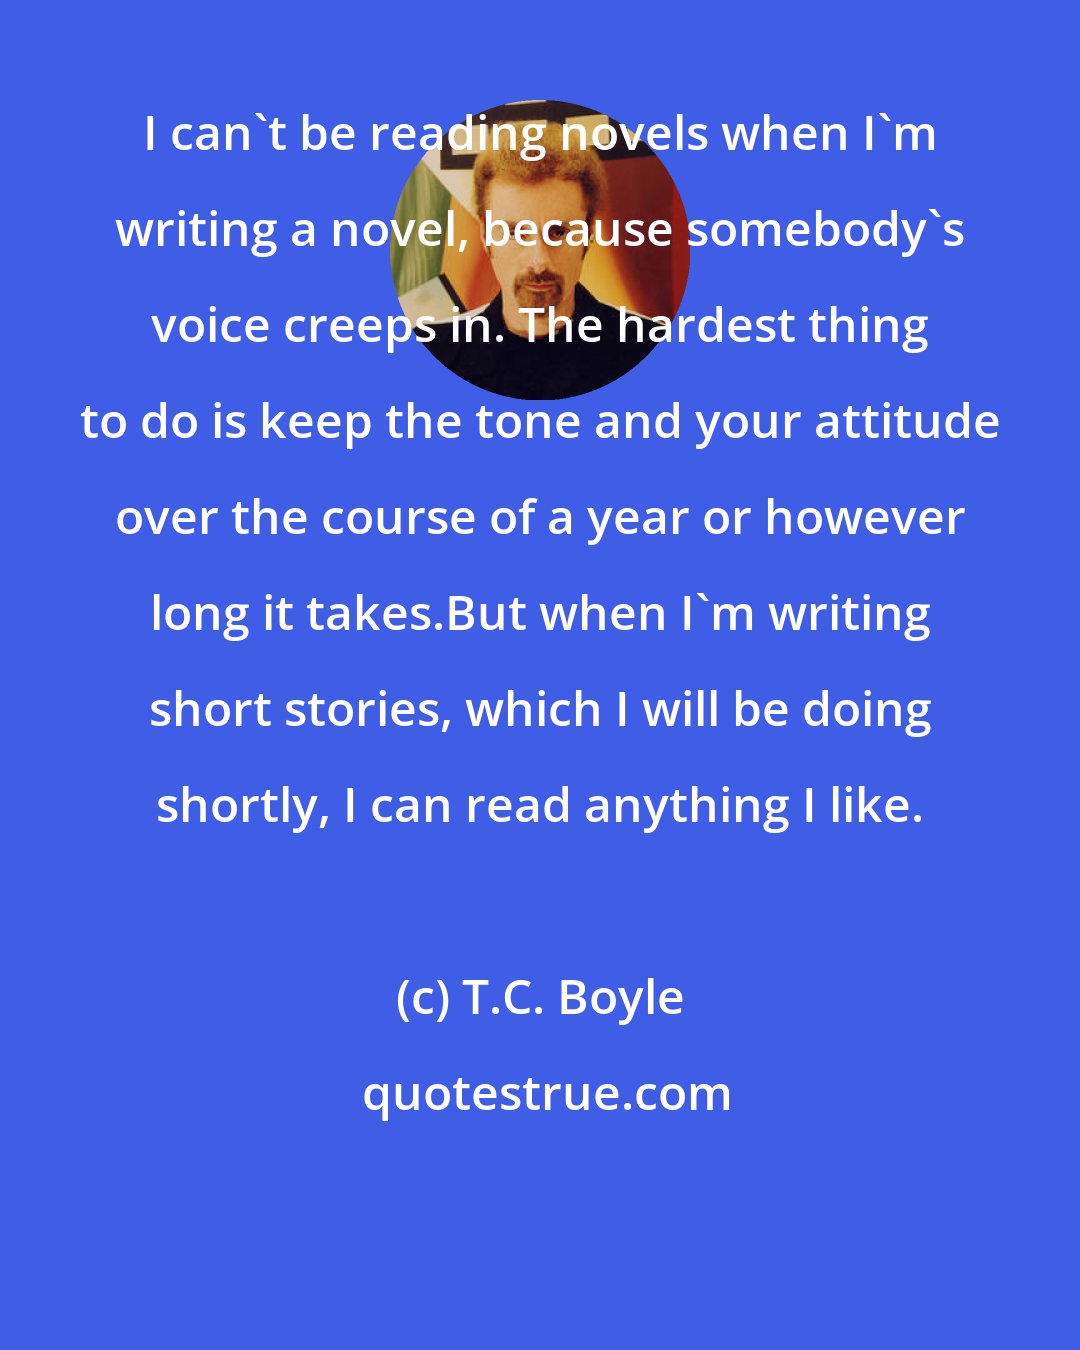 T.C. Boyle: I can't be reading novels when I'm writing a novel, because somebody's voice creeps in. The hardest thing to do is keep the tone and your attitude over the course of a year or however long it takes.But when I'm writing short stories, which I will be doing shortly, I can read anything I like.